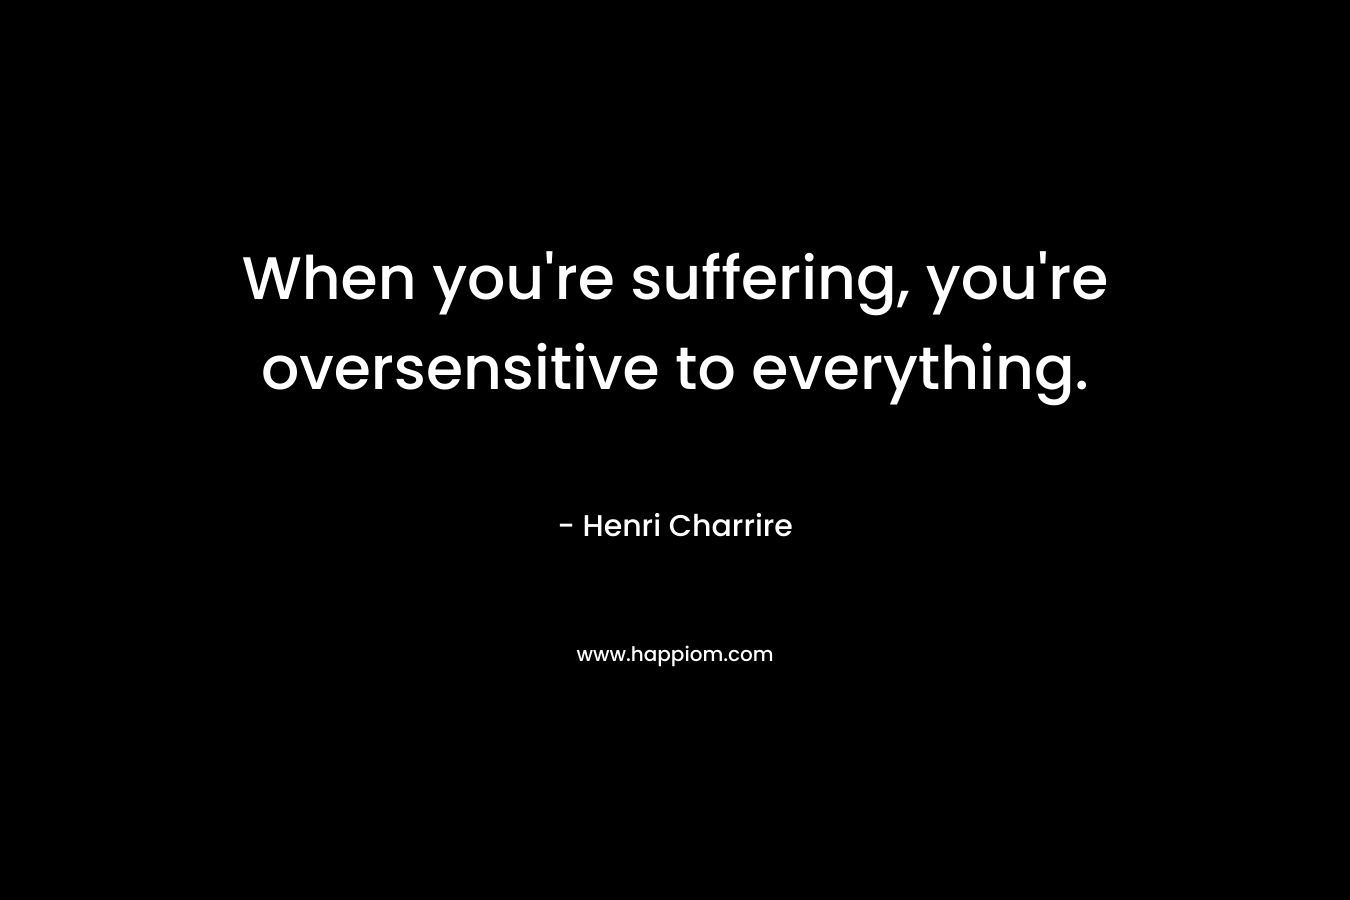 When you’re suffering, you’re oversensitive to everything. – Henri Charrire